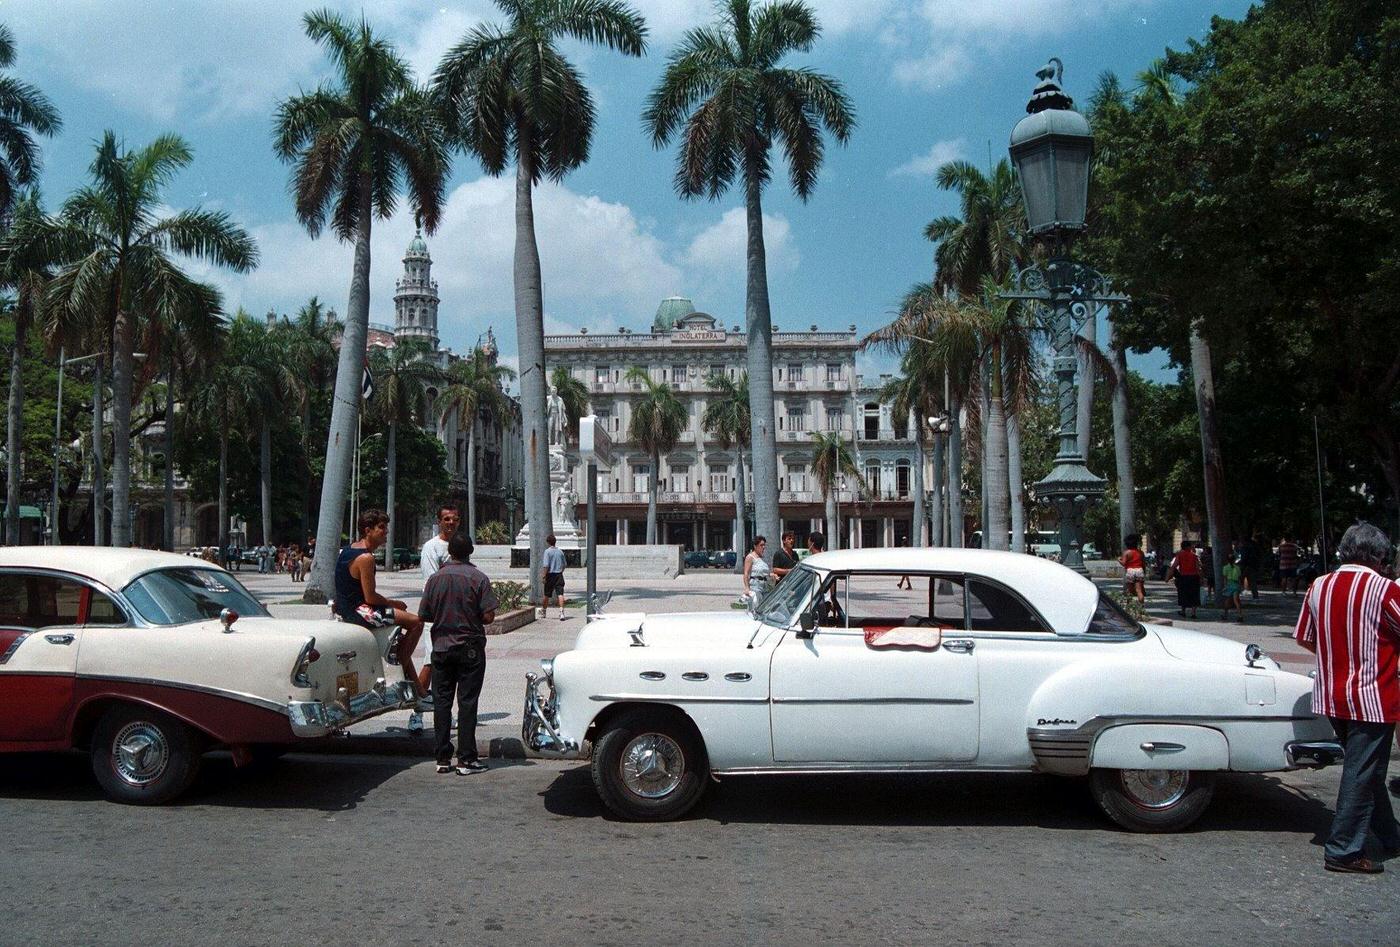 Colonial Hotel "Inglaterra" with old cars and palm trees in Havana, Cuba.